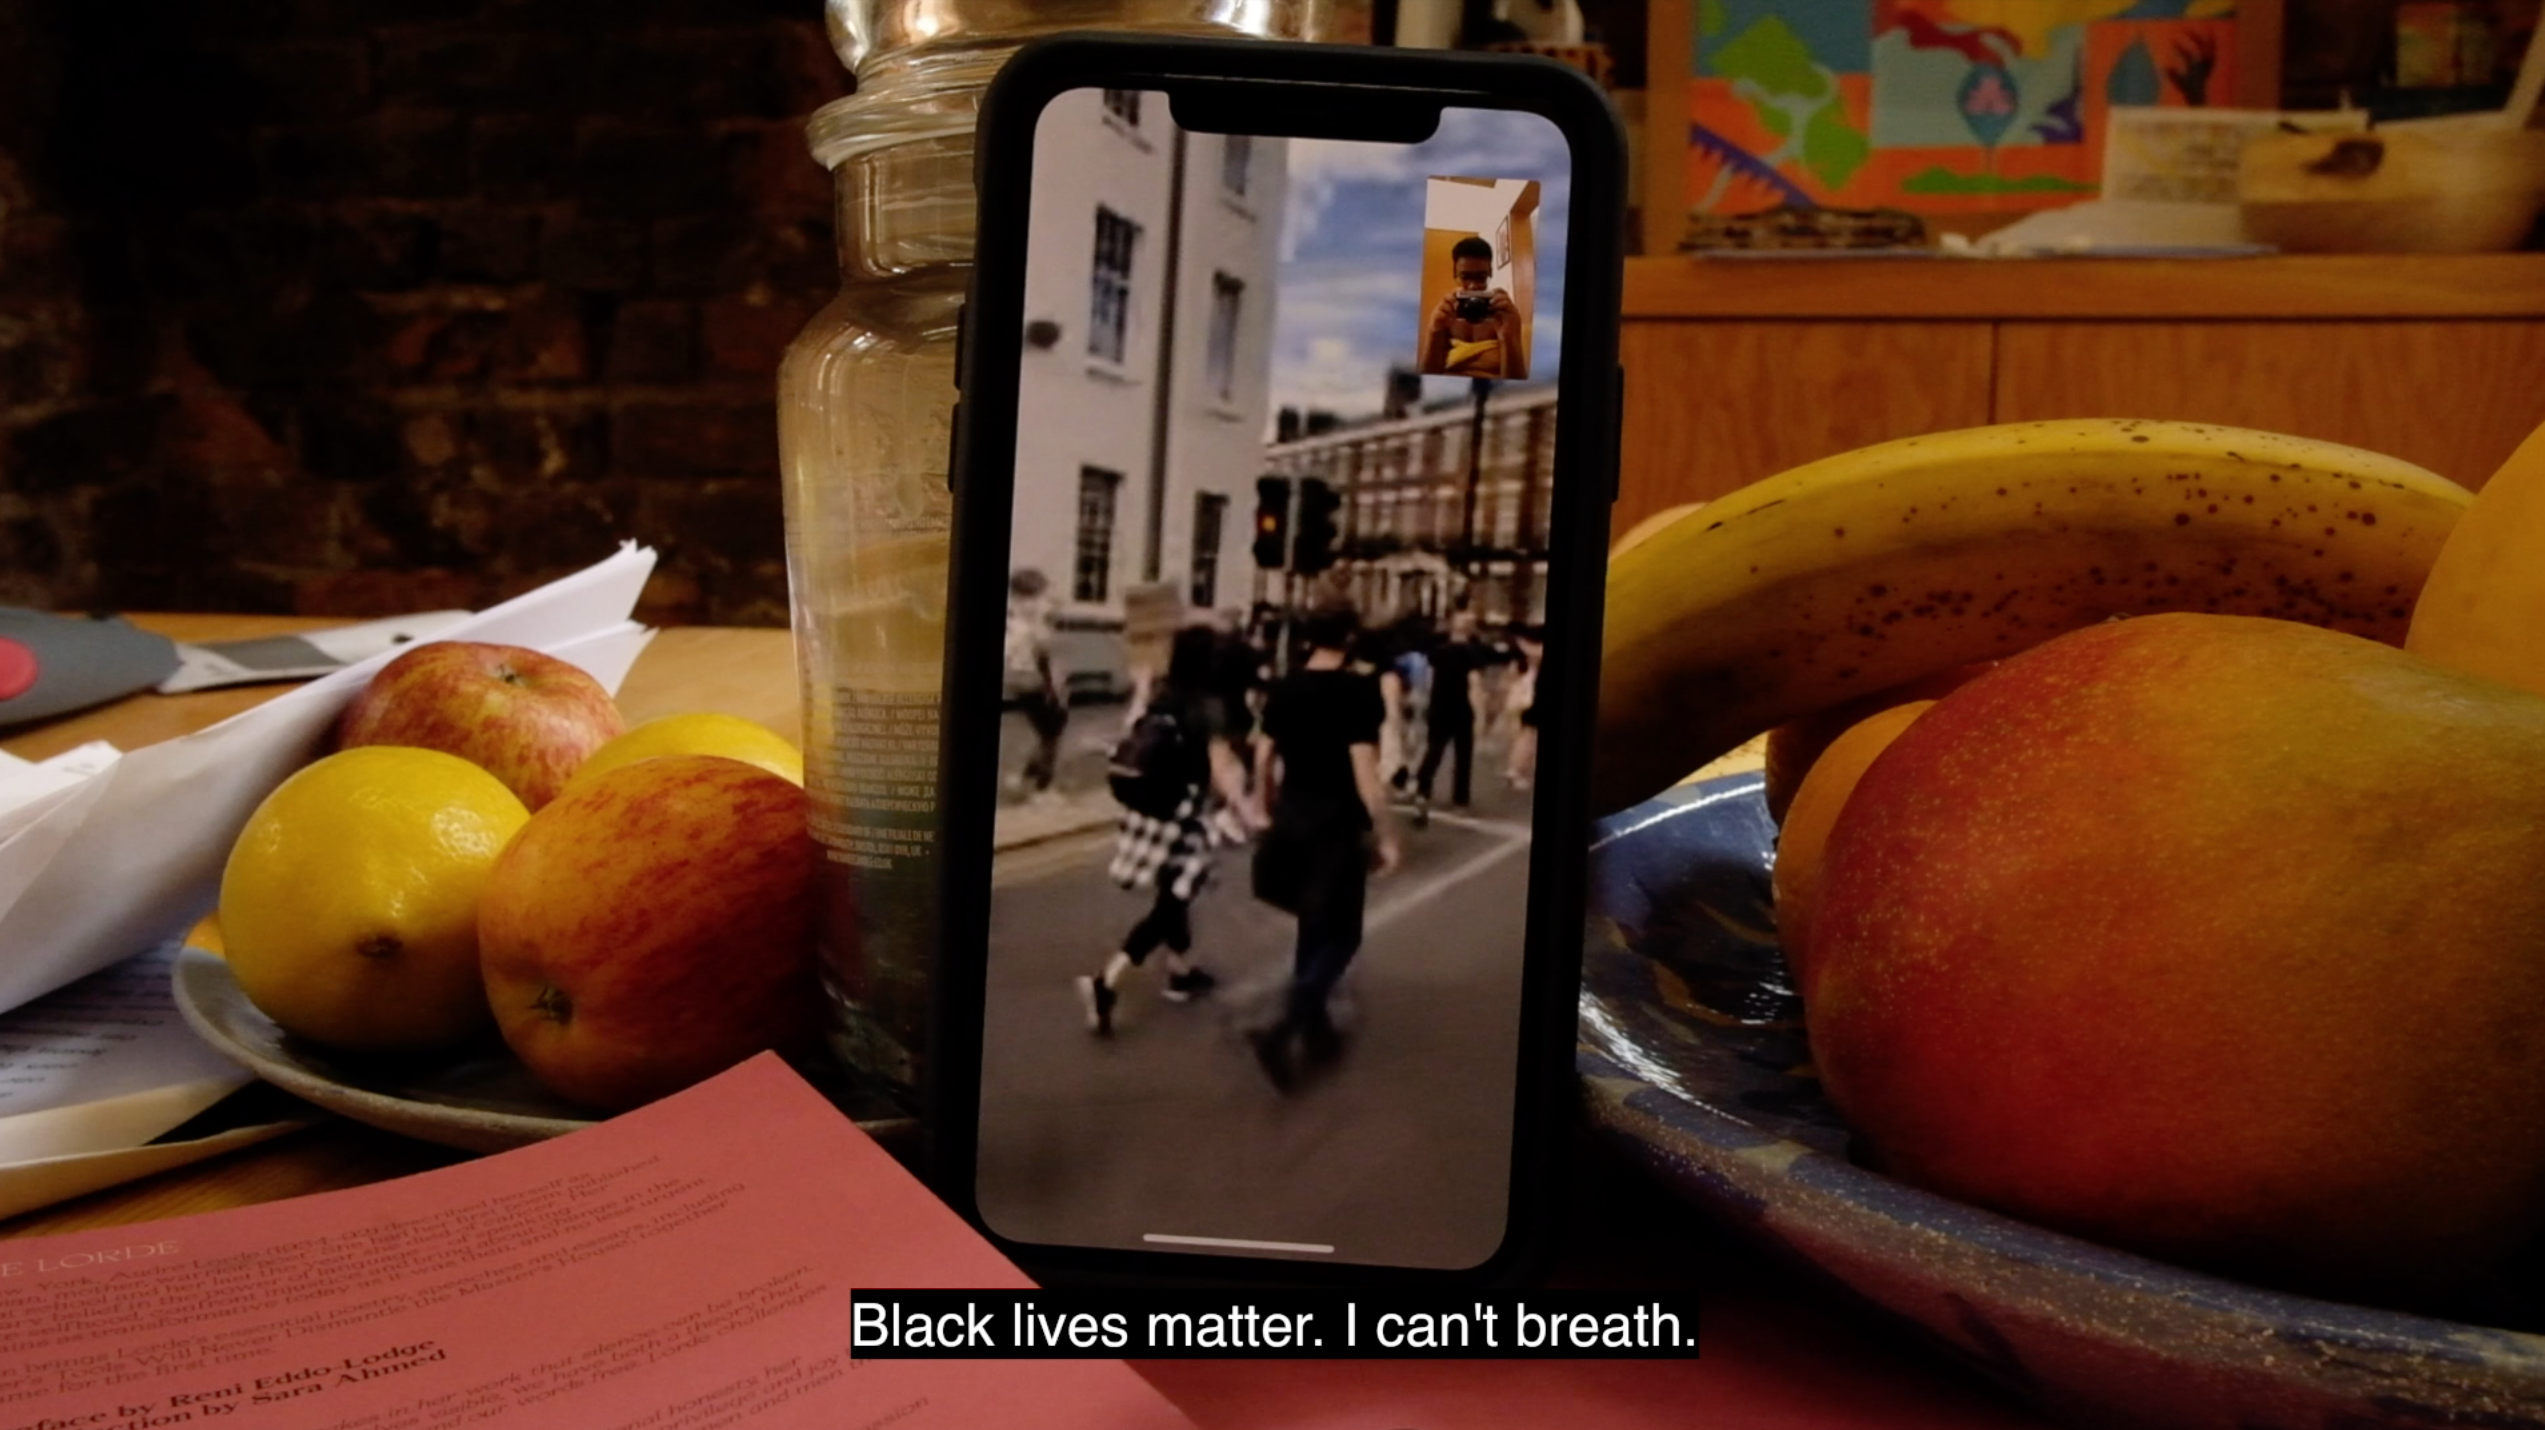 phone on a tablet with video showing; on the table is a fruit bowl with fruit in and the rest of the background is blurred - its part of kiara mohamed film